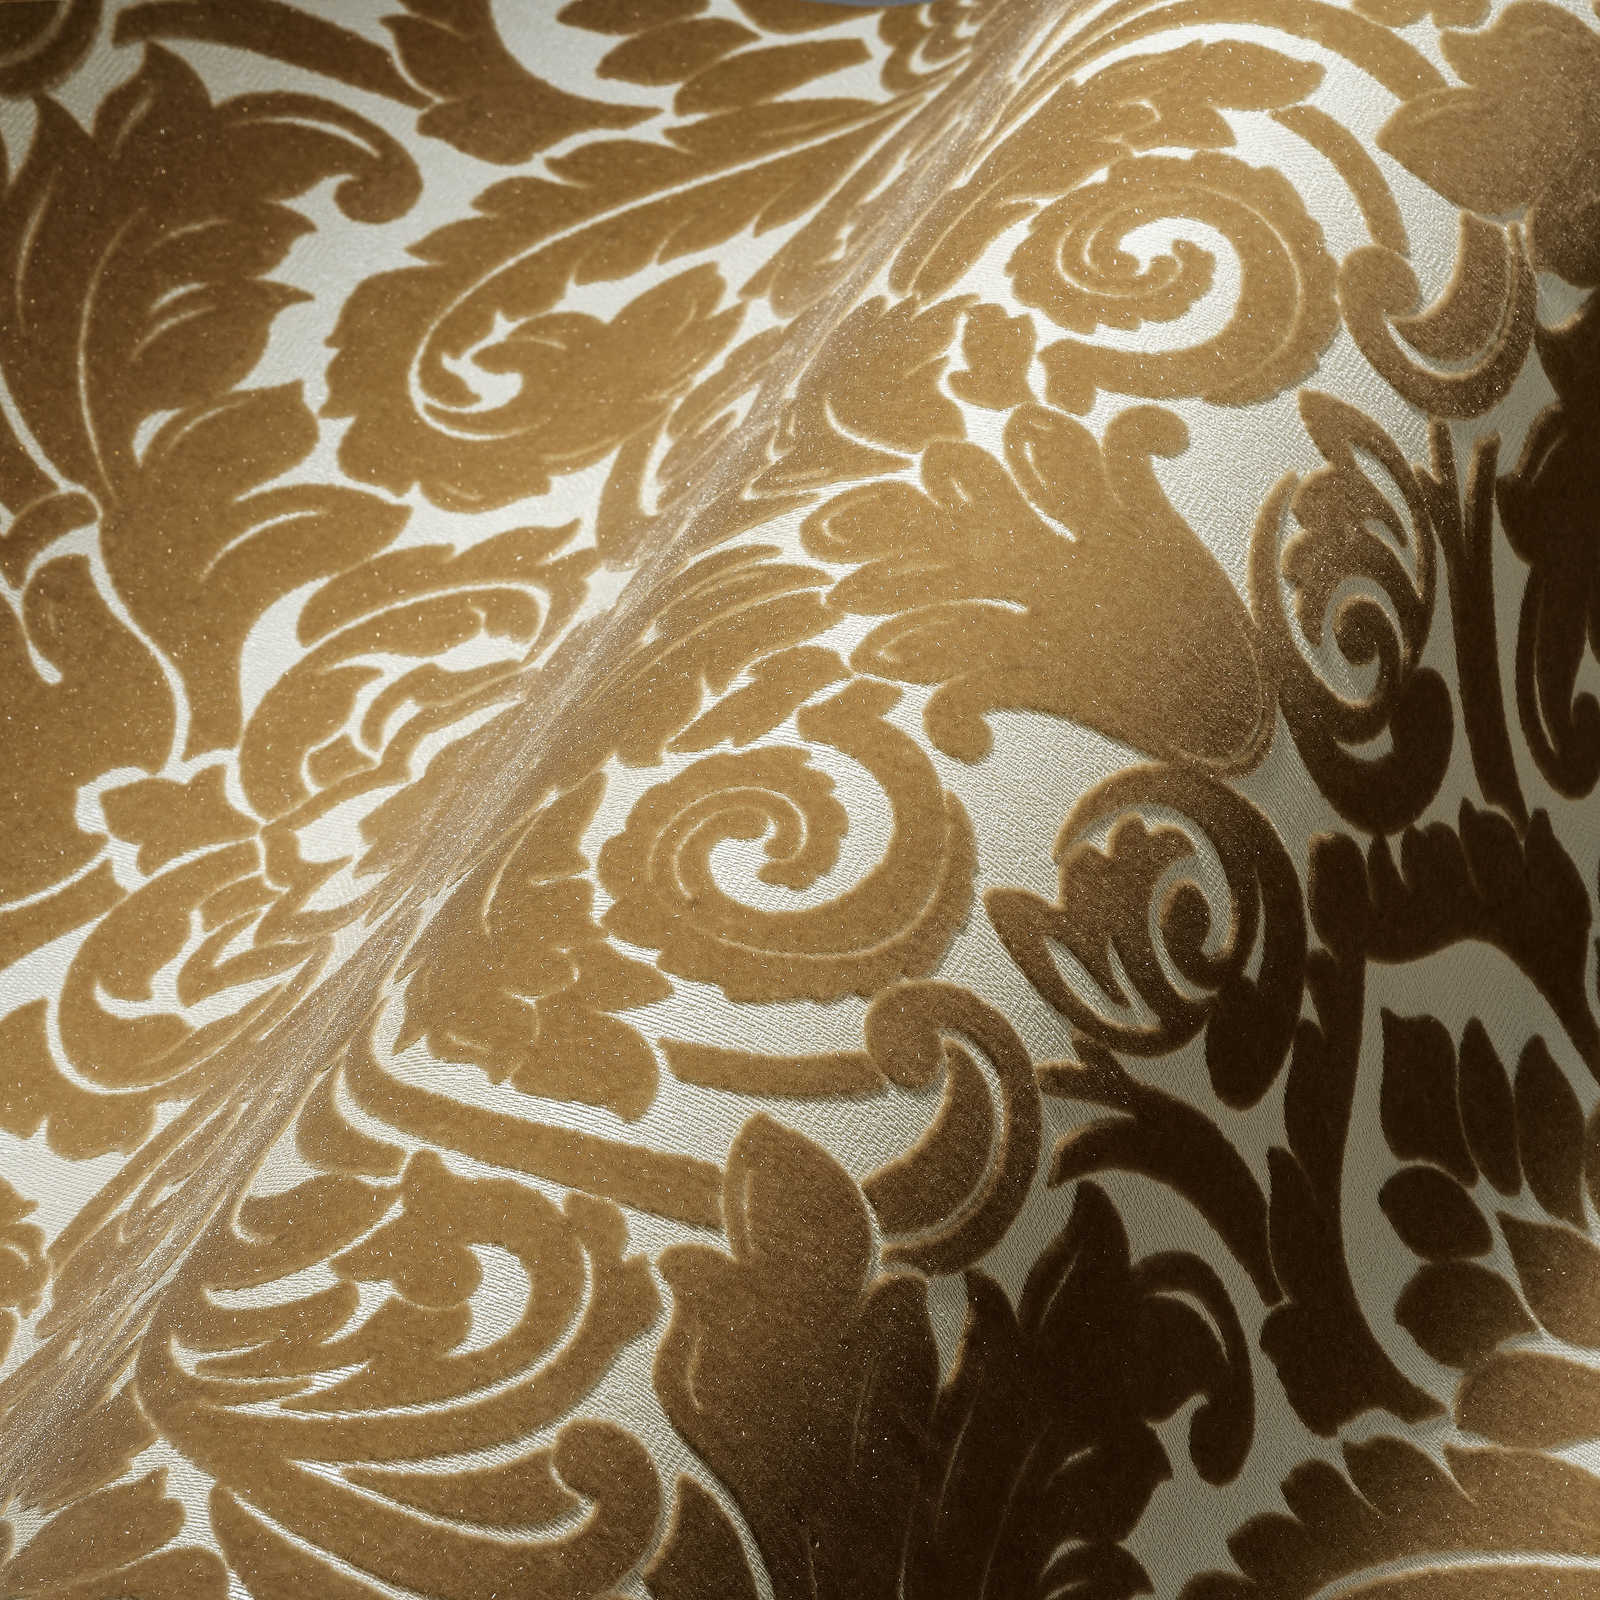             Baroque wallpaper with silky flock pattern in gold
        